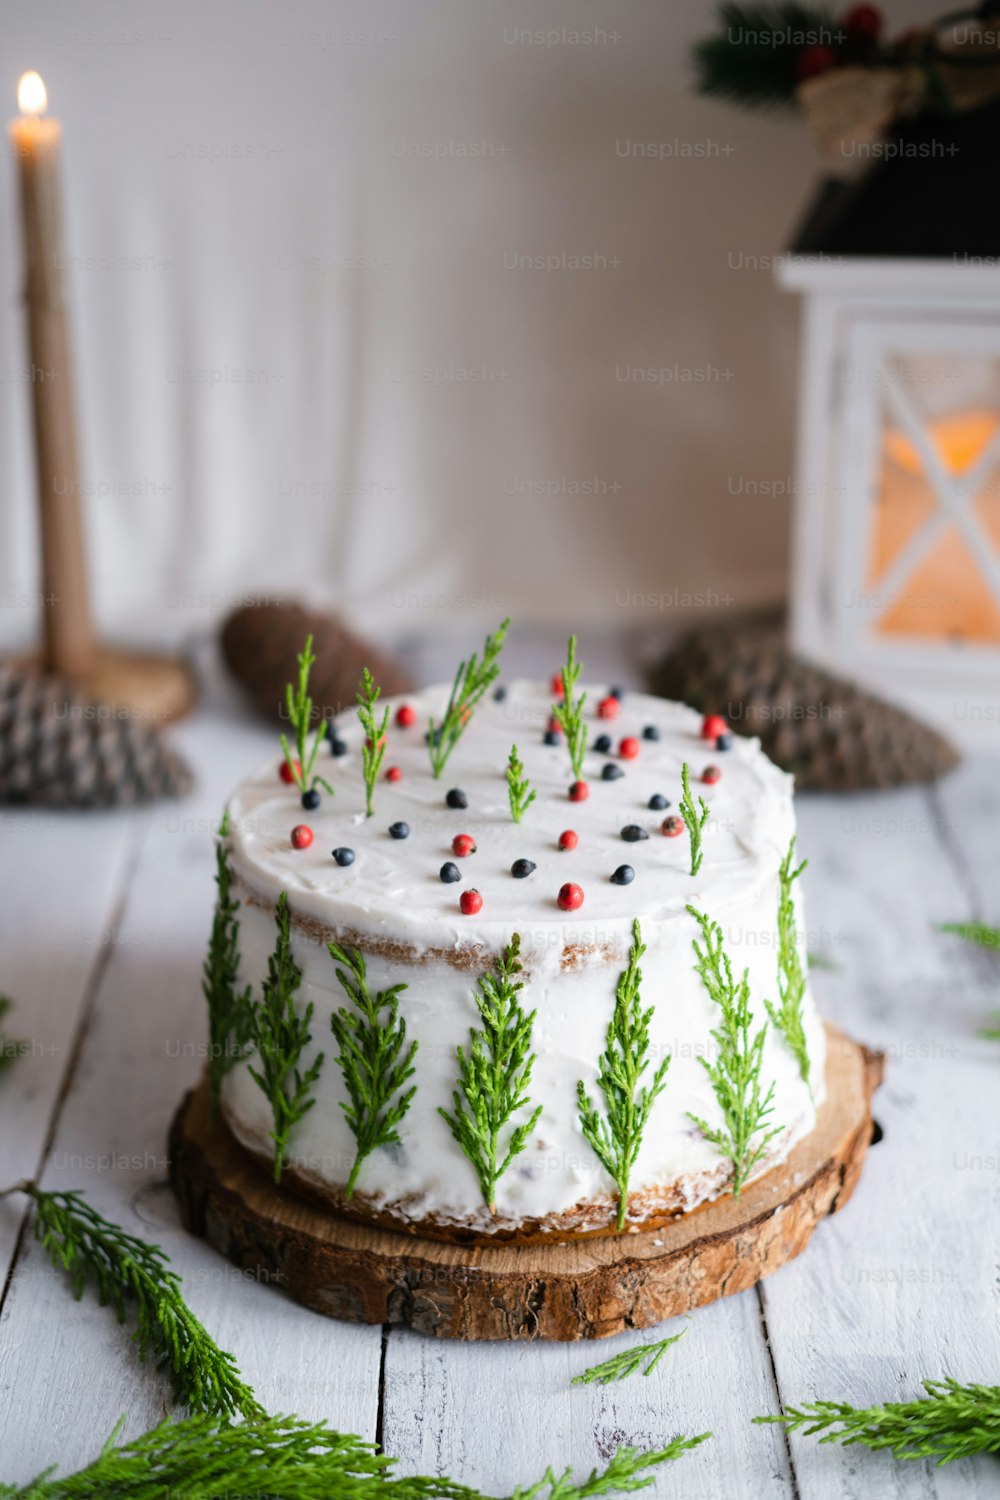 a decorated cake sitting on top of a wooden board